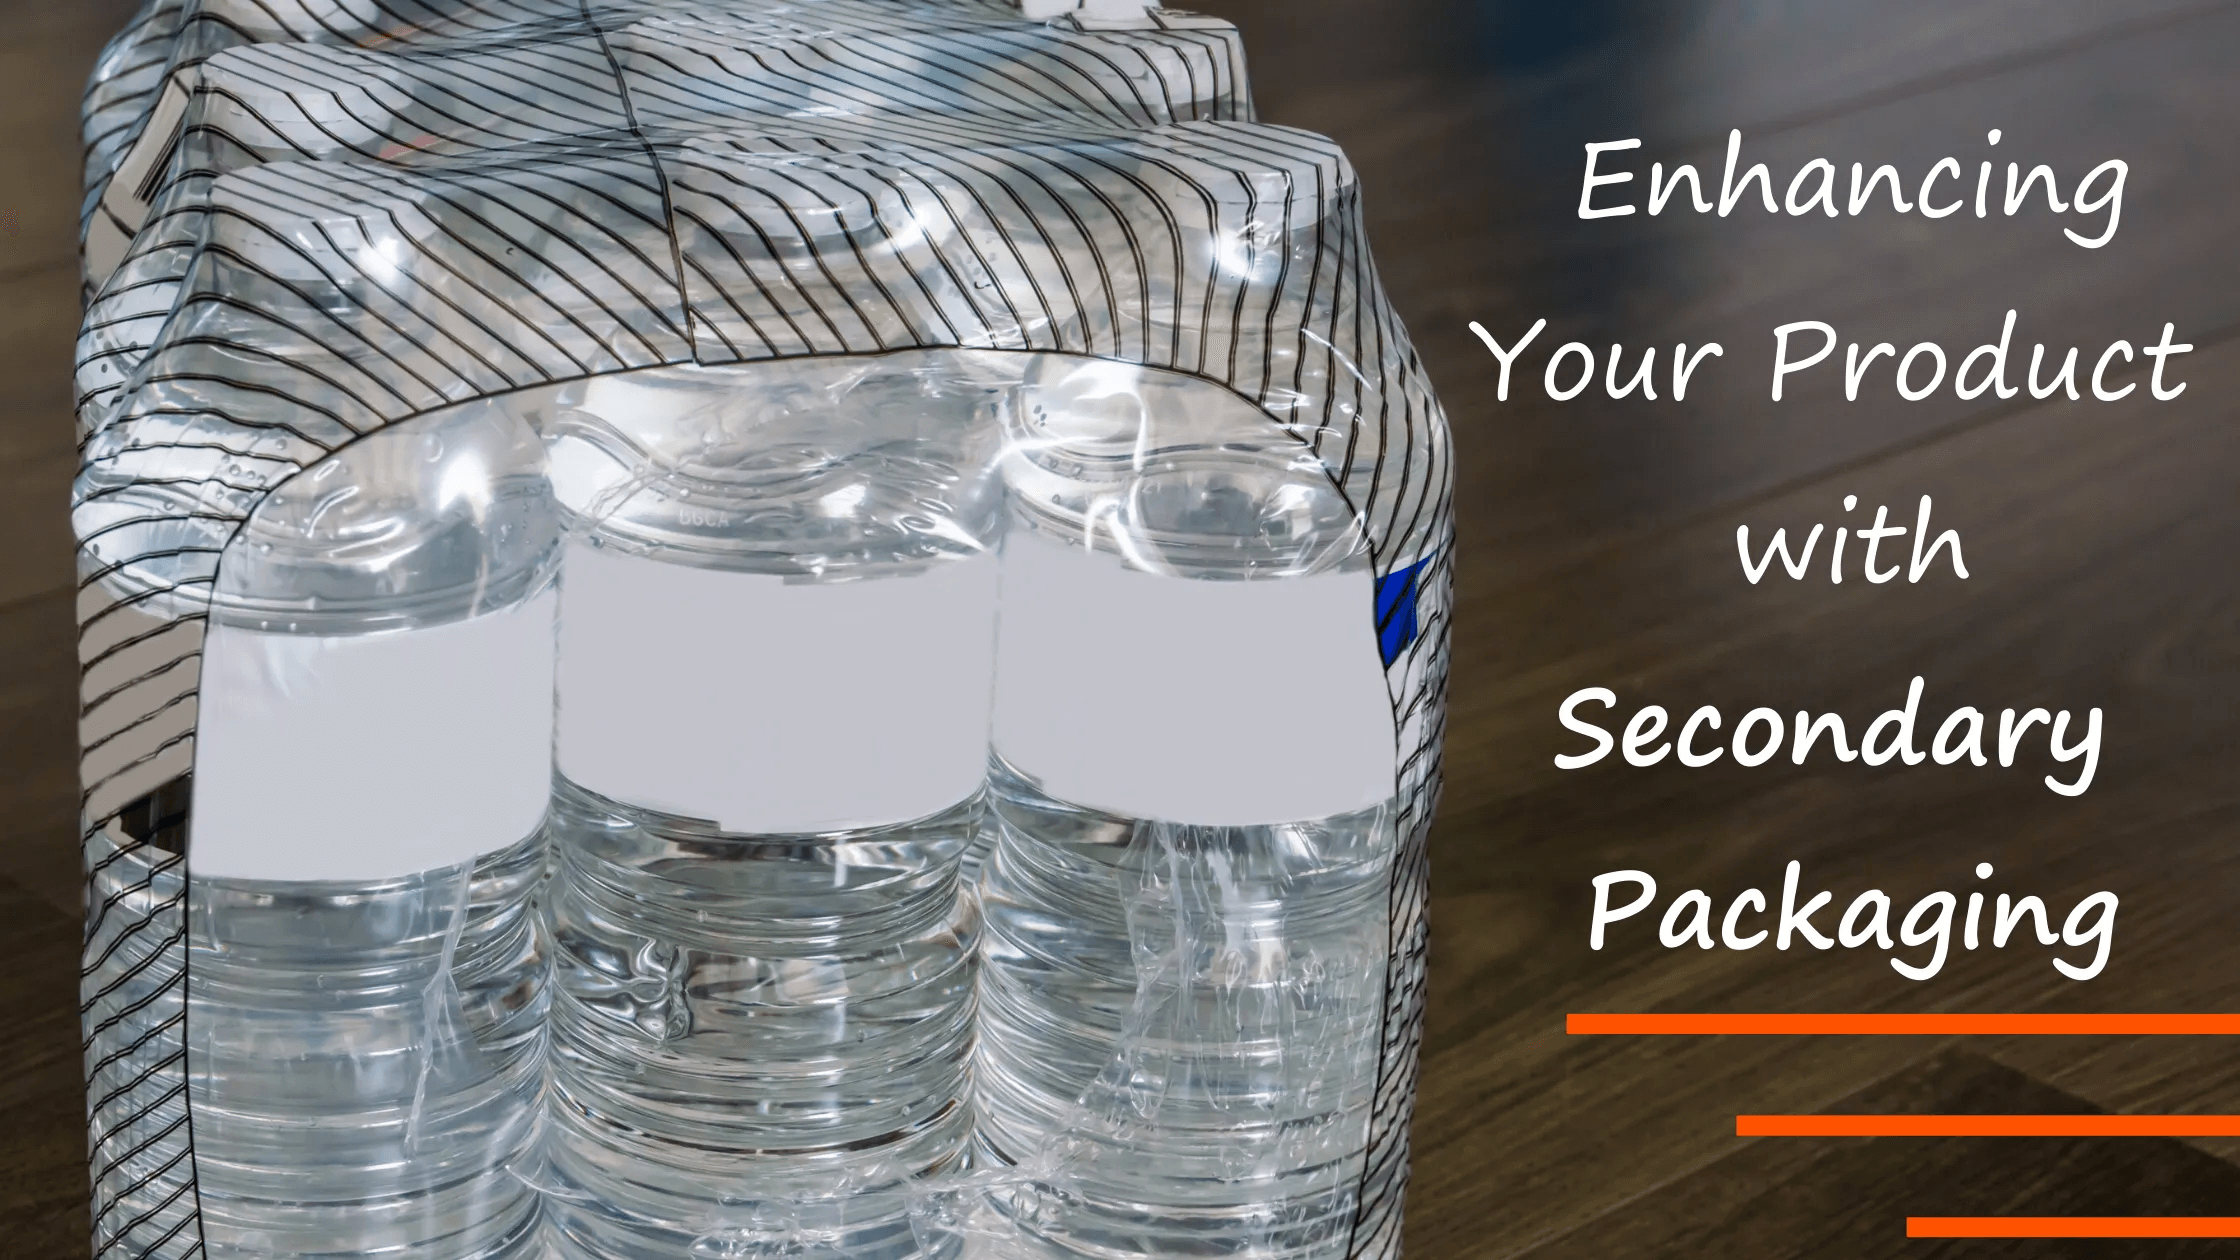 Packaged water bottles with the text "Enhancing Your Product with Secondary Packaging"